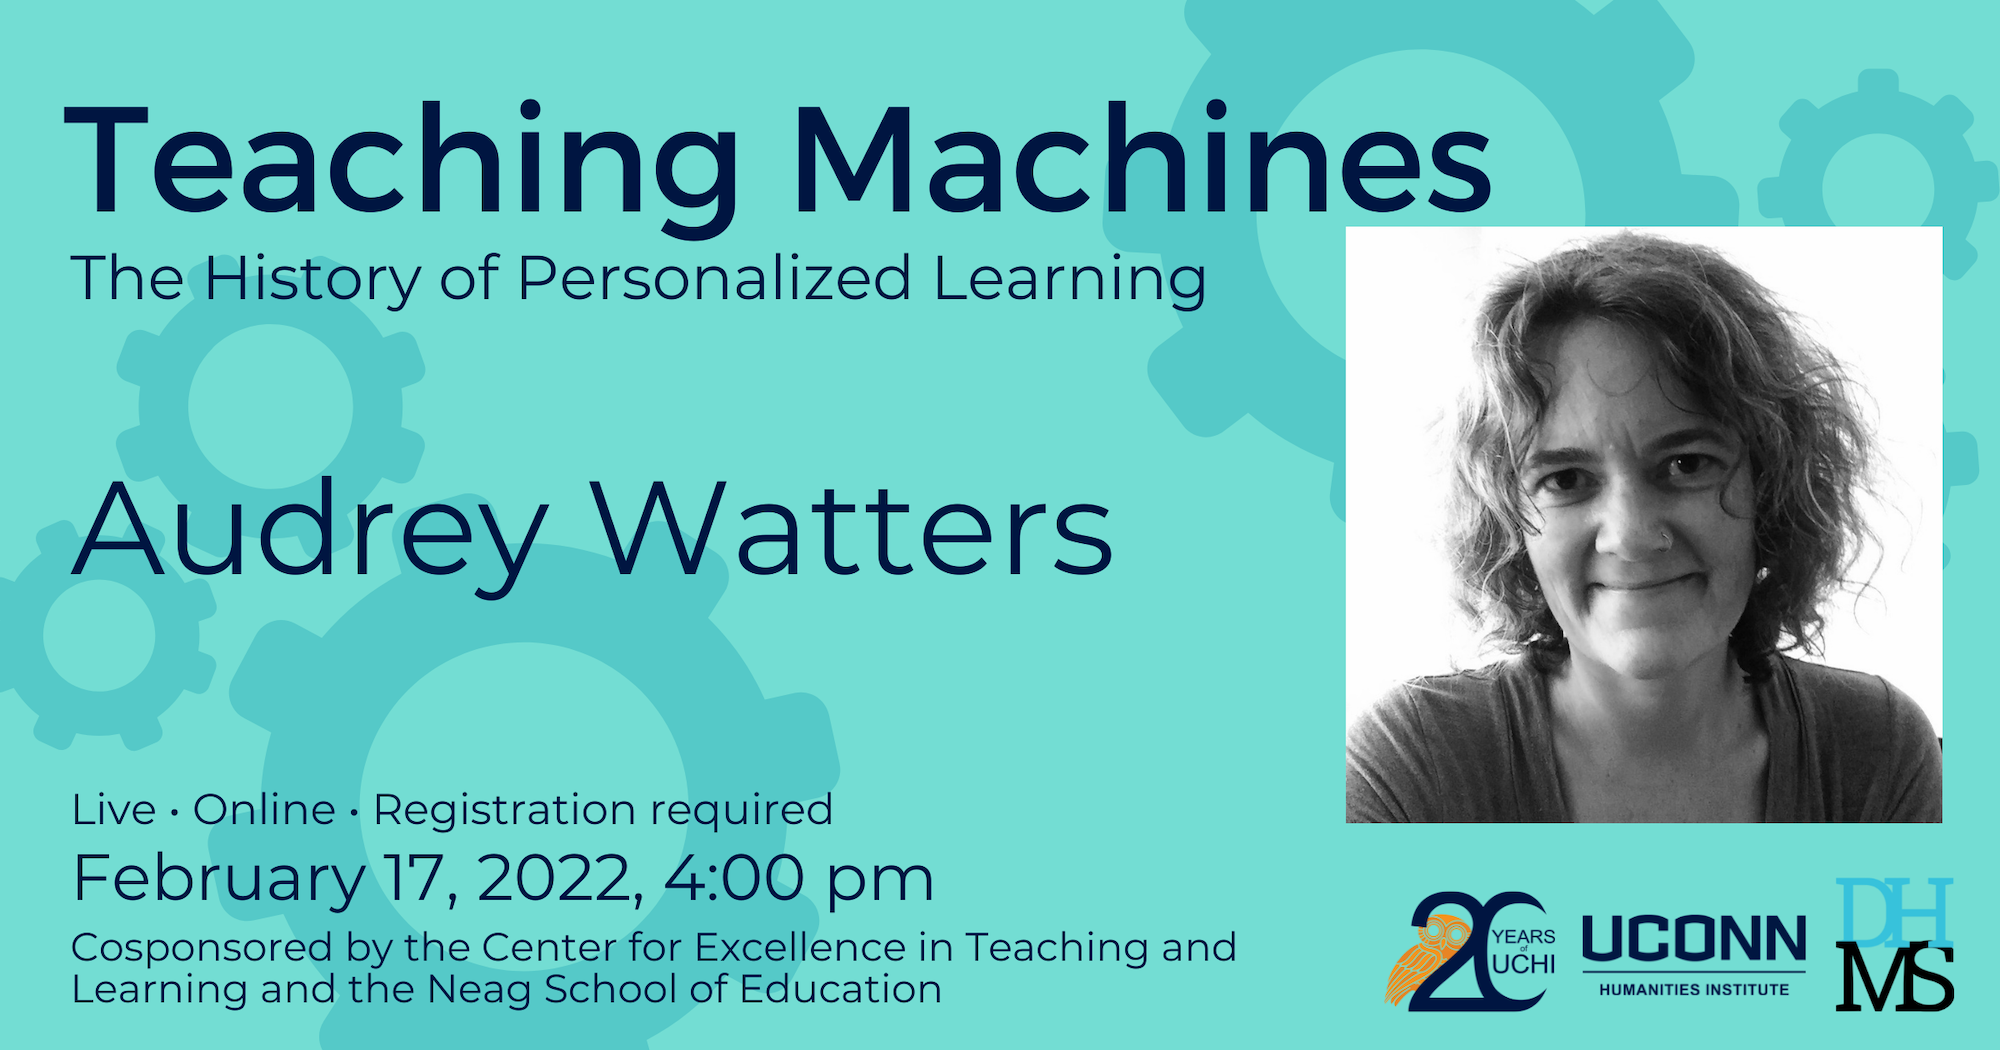 Poster with headshot of Audrey Watters and text that reads: Teaching Machines: The History of Personalized Learning, by Audrey Watters. Live. Online. Registration required. February 17, 2022, 4:00pm. Co sponsored by the center for excellence in teaching and learning and the Neag School of Education.